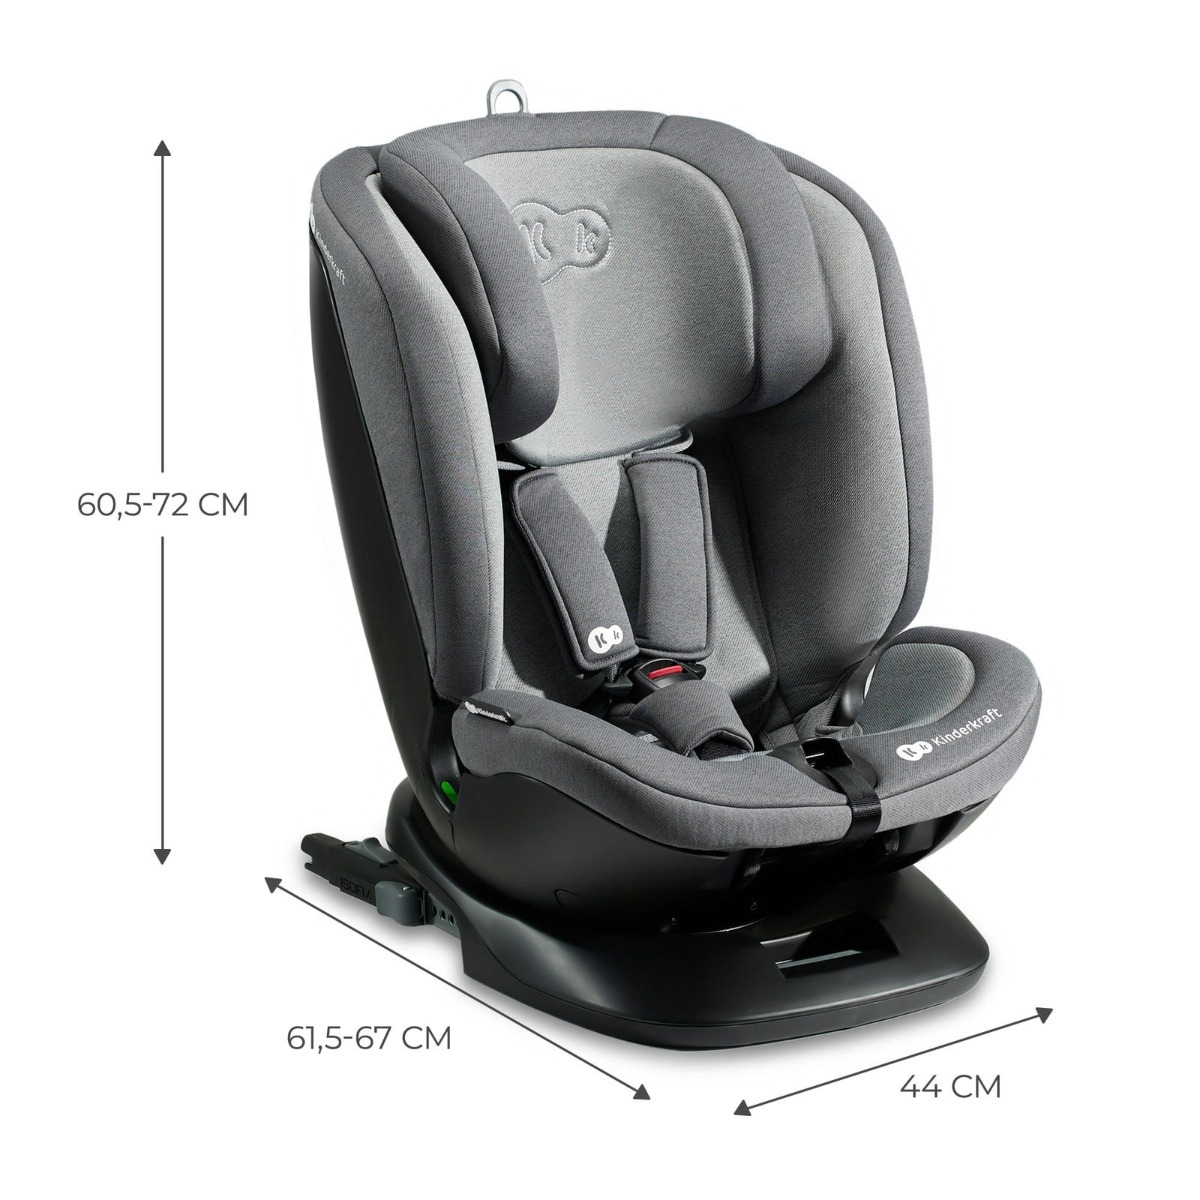 Car seat XPEDITION 2 i-Size